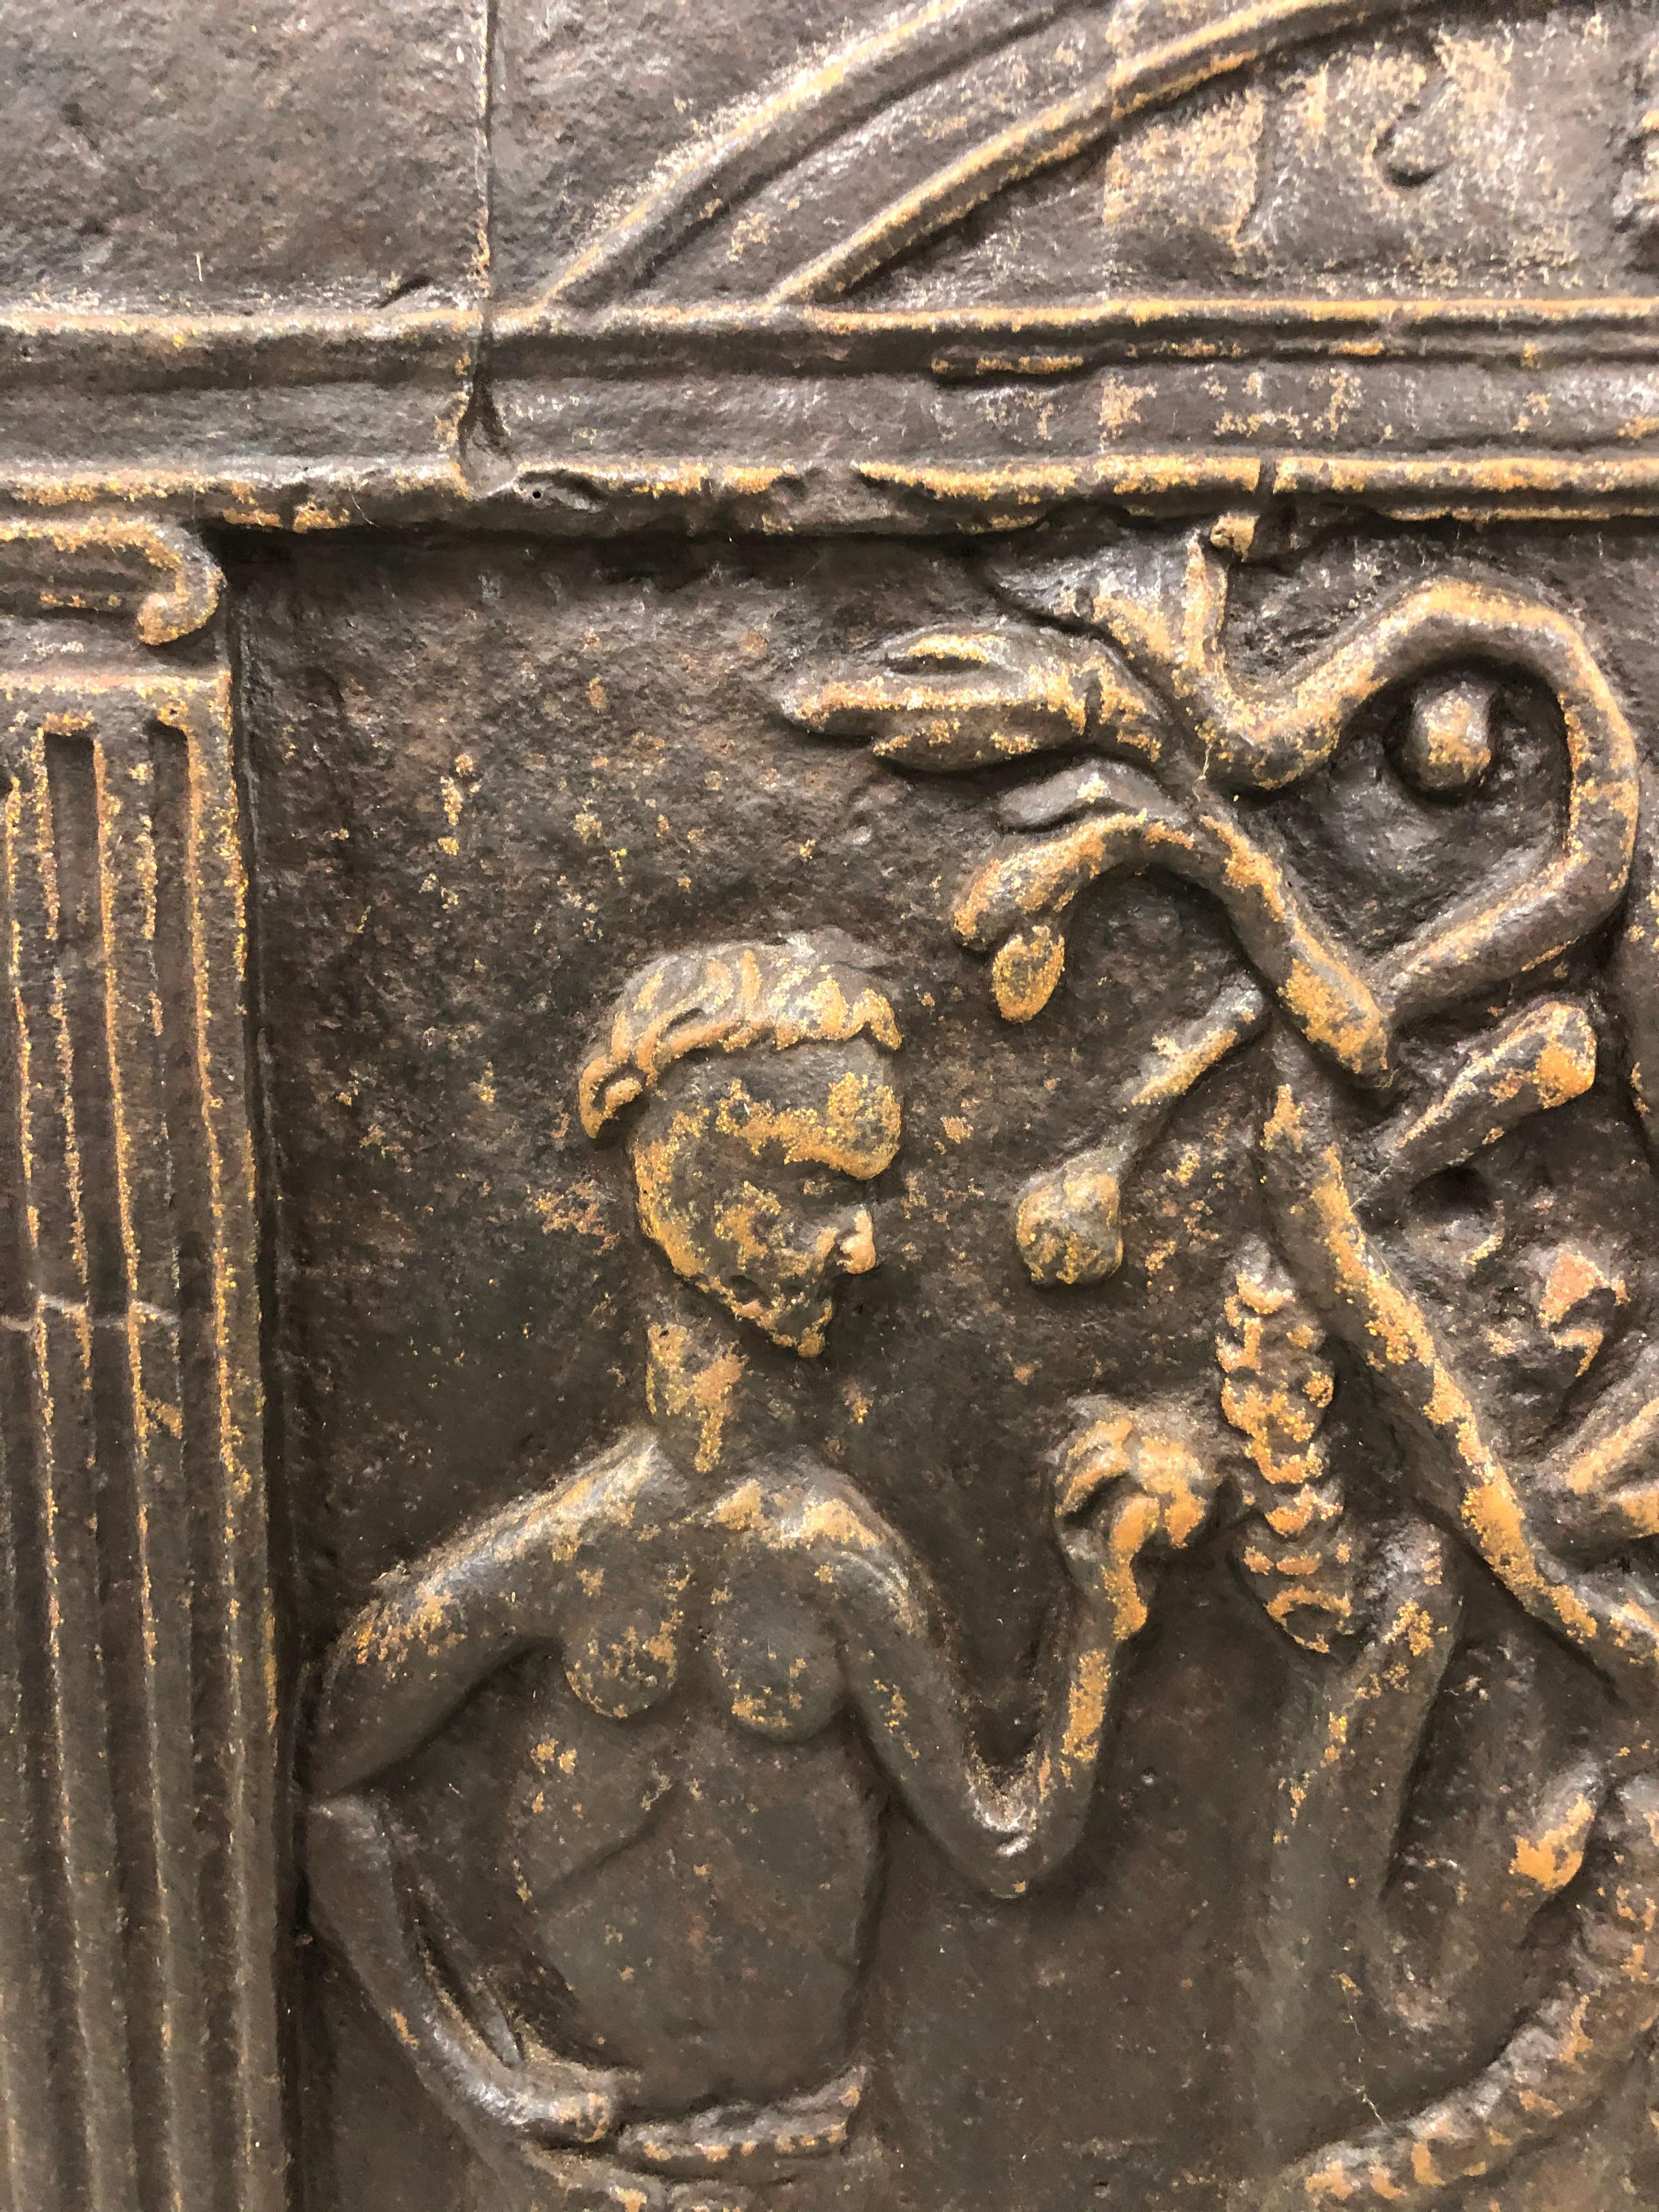 Cast iron fireplace fireback plate. Sculptural depiction of Adam and Eve in Paradise. Most likely Scandinavian origin.

Property from esteemed interior designer Juan Montoya. Juan Montoya is one of the most acclaimed and prolific interior